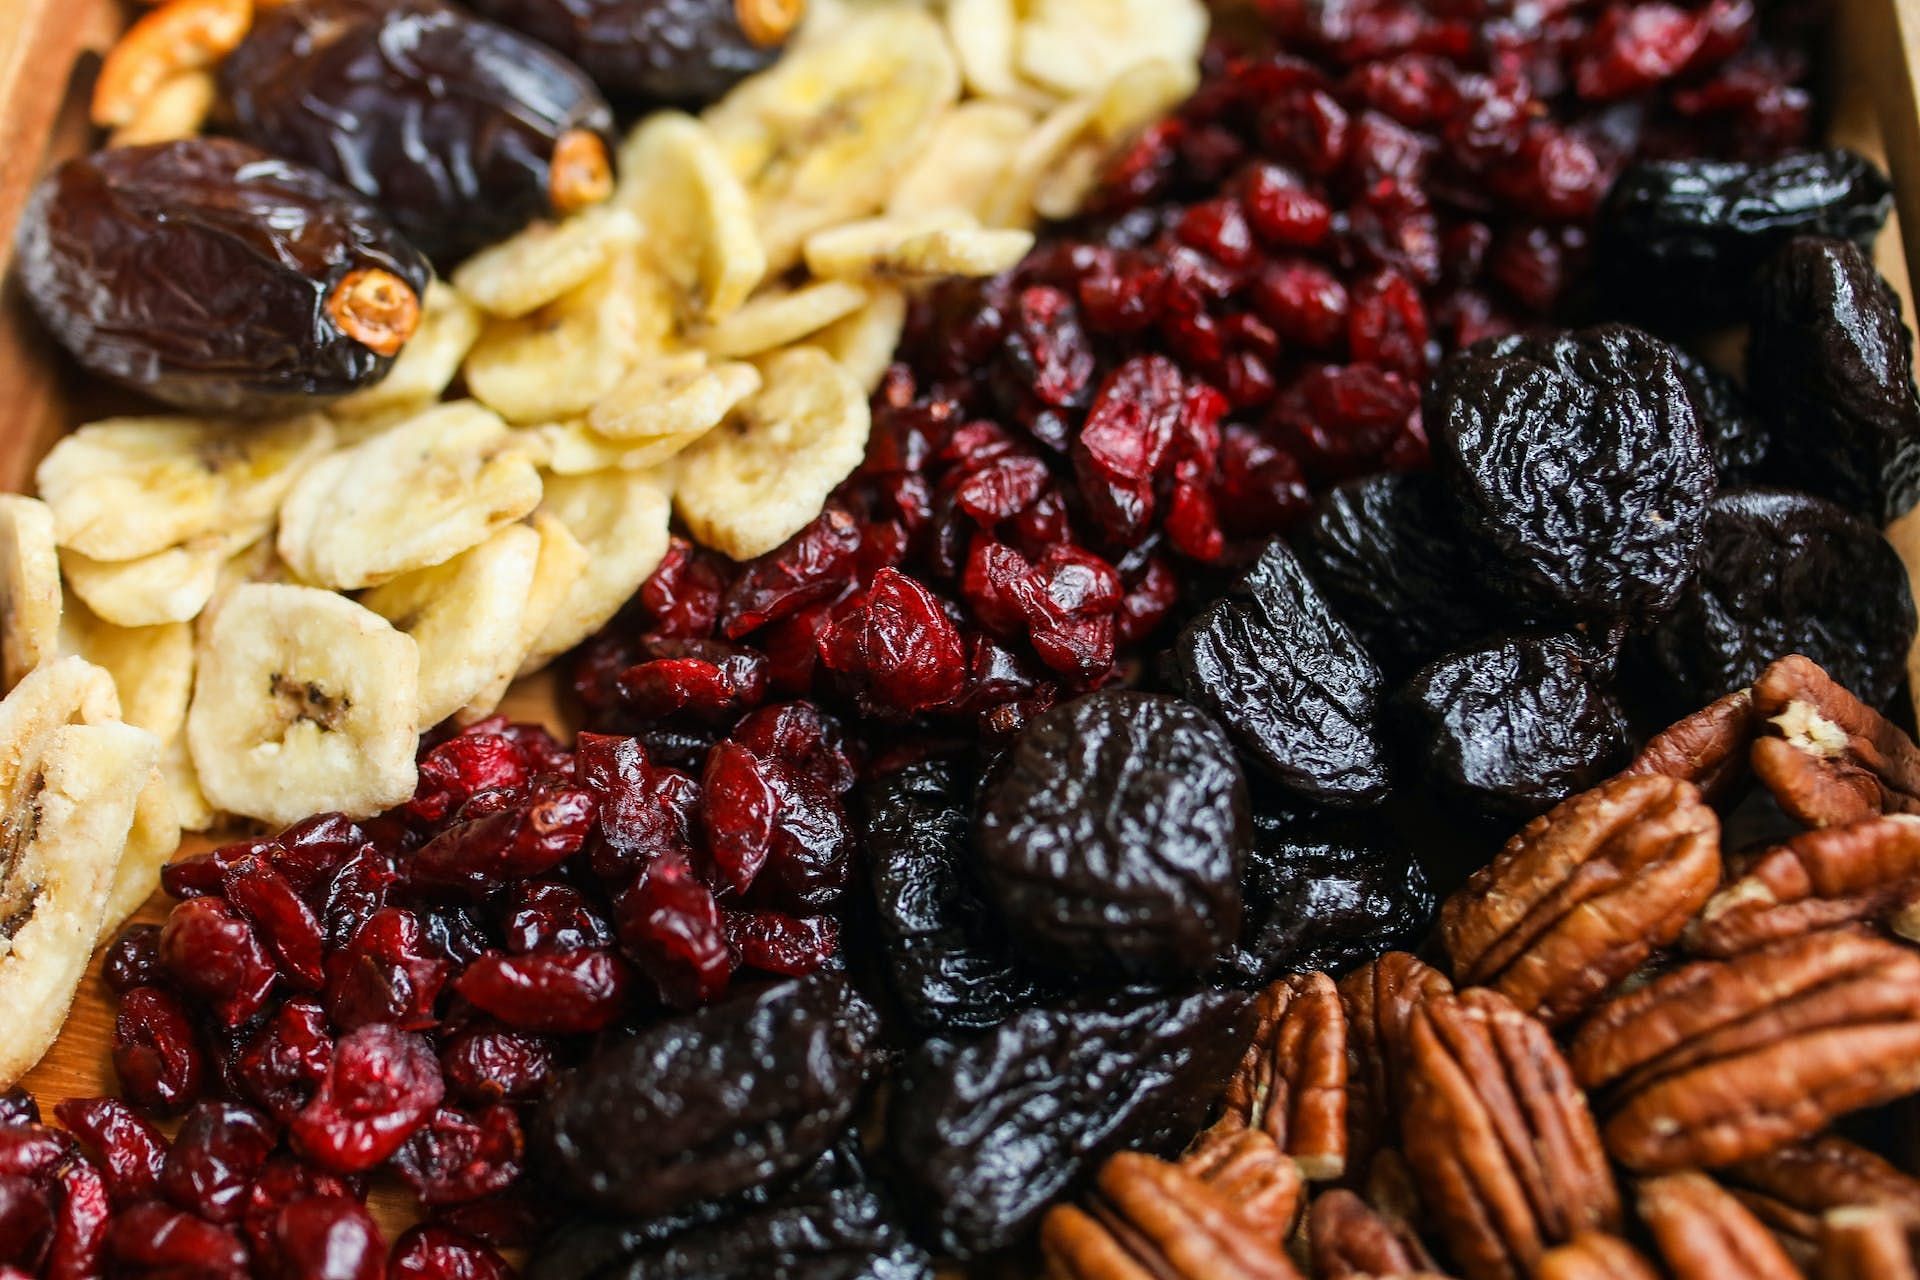 Dried fruits can raise blood sugar level quickly. (Image via Pexels/Polina Tankilevitch)